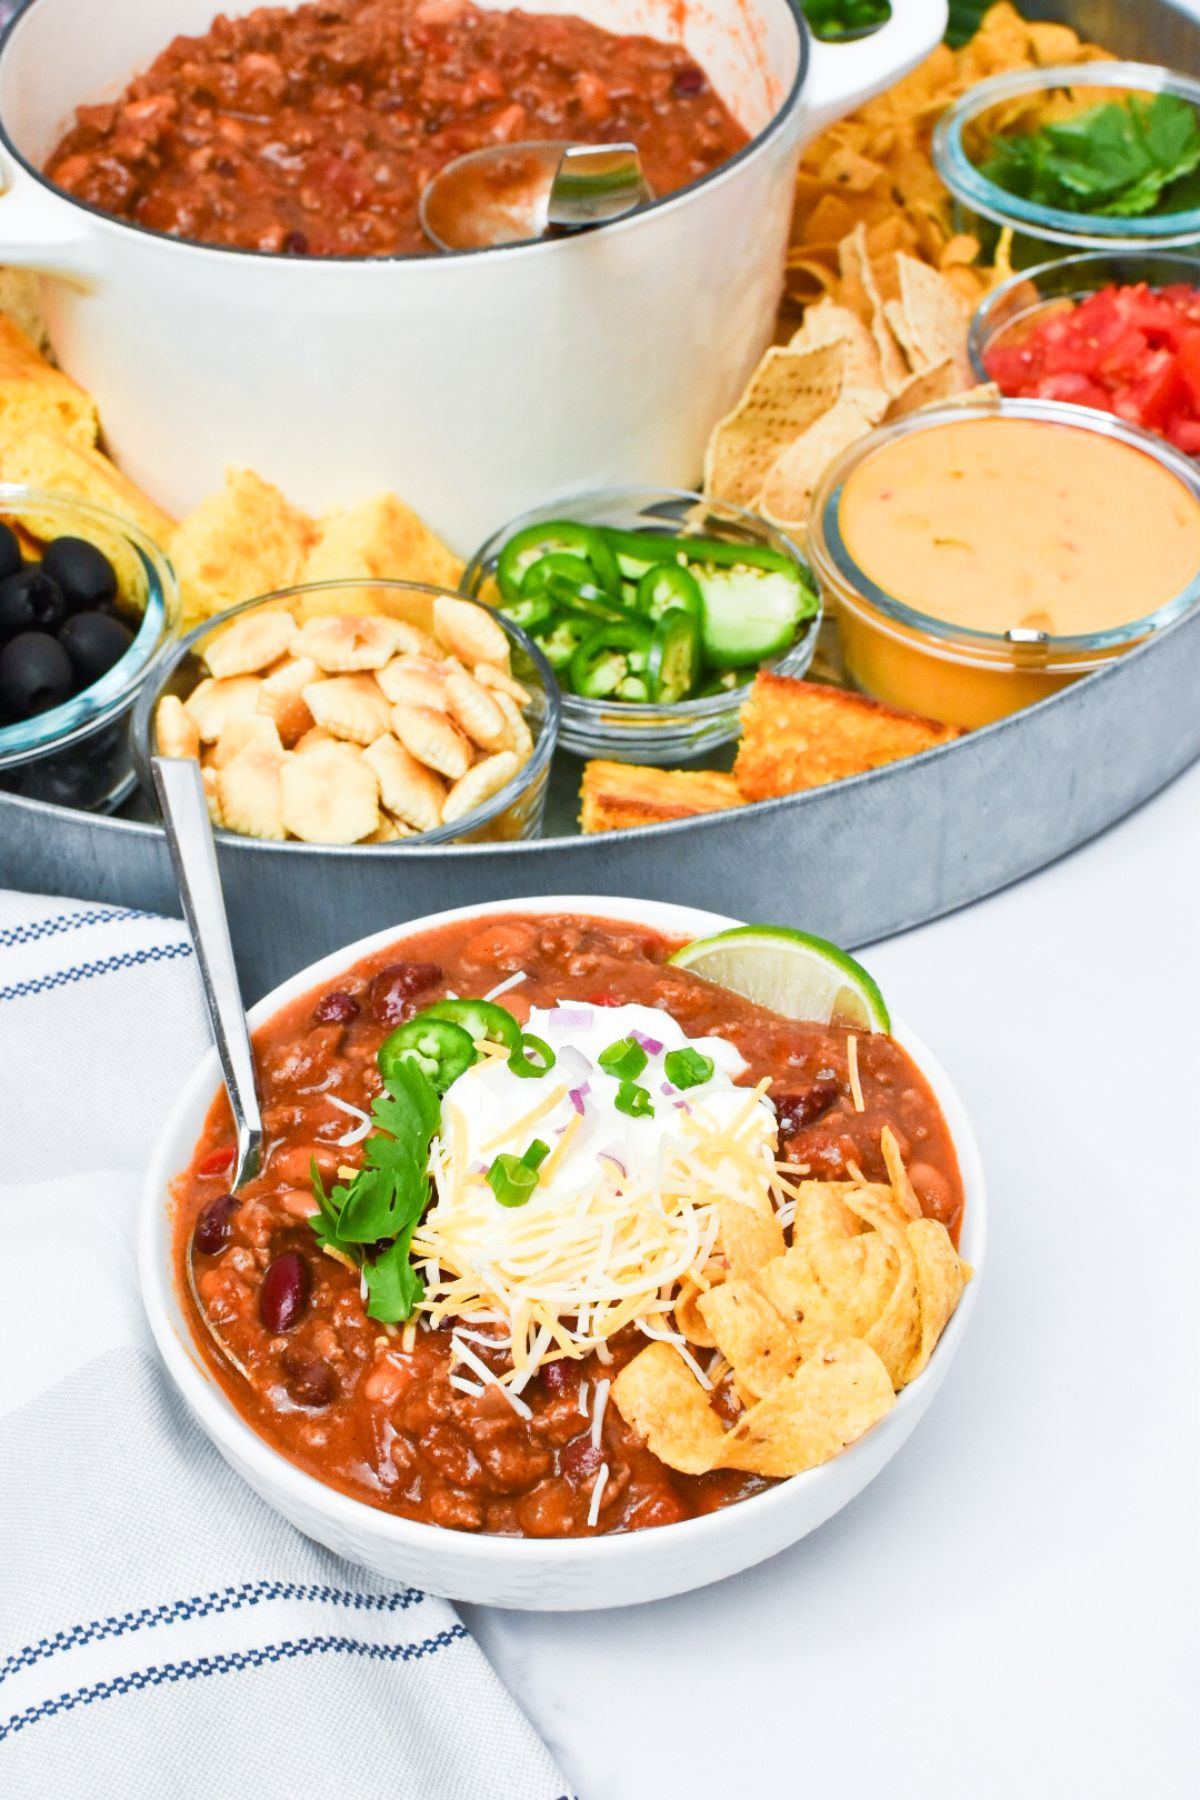 A bowl of chili in front of a large selection of chili toppings.